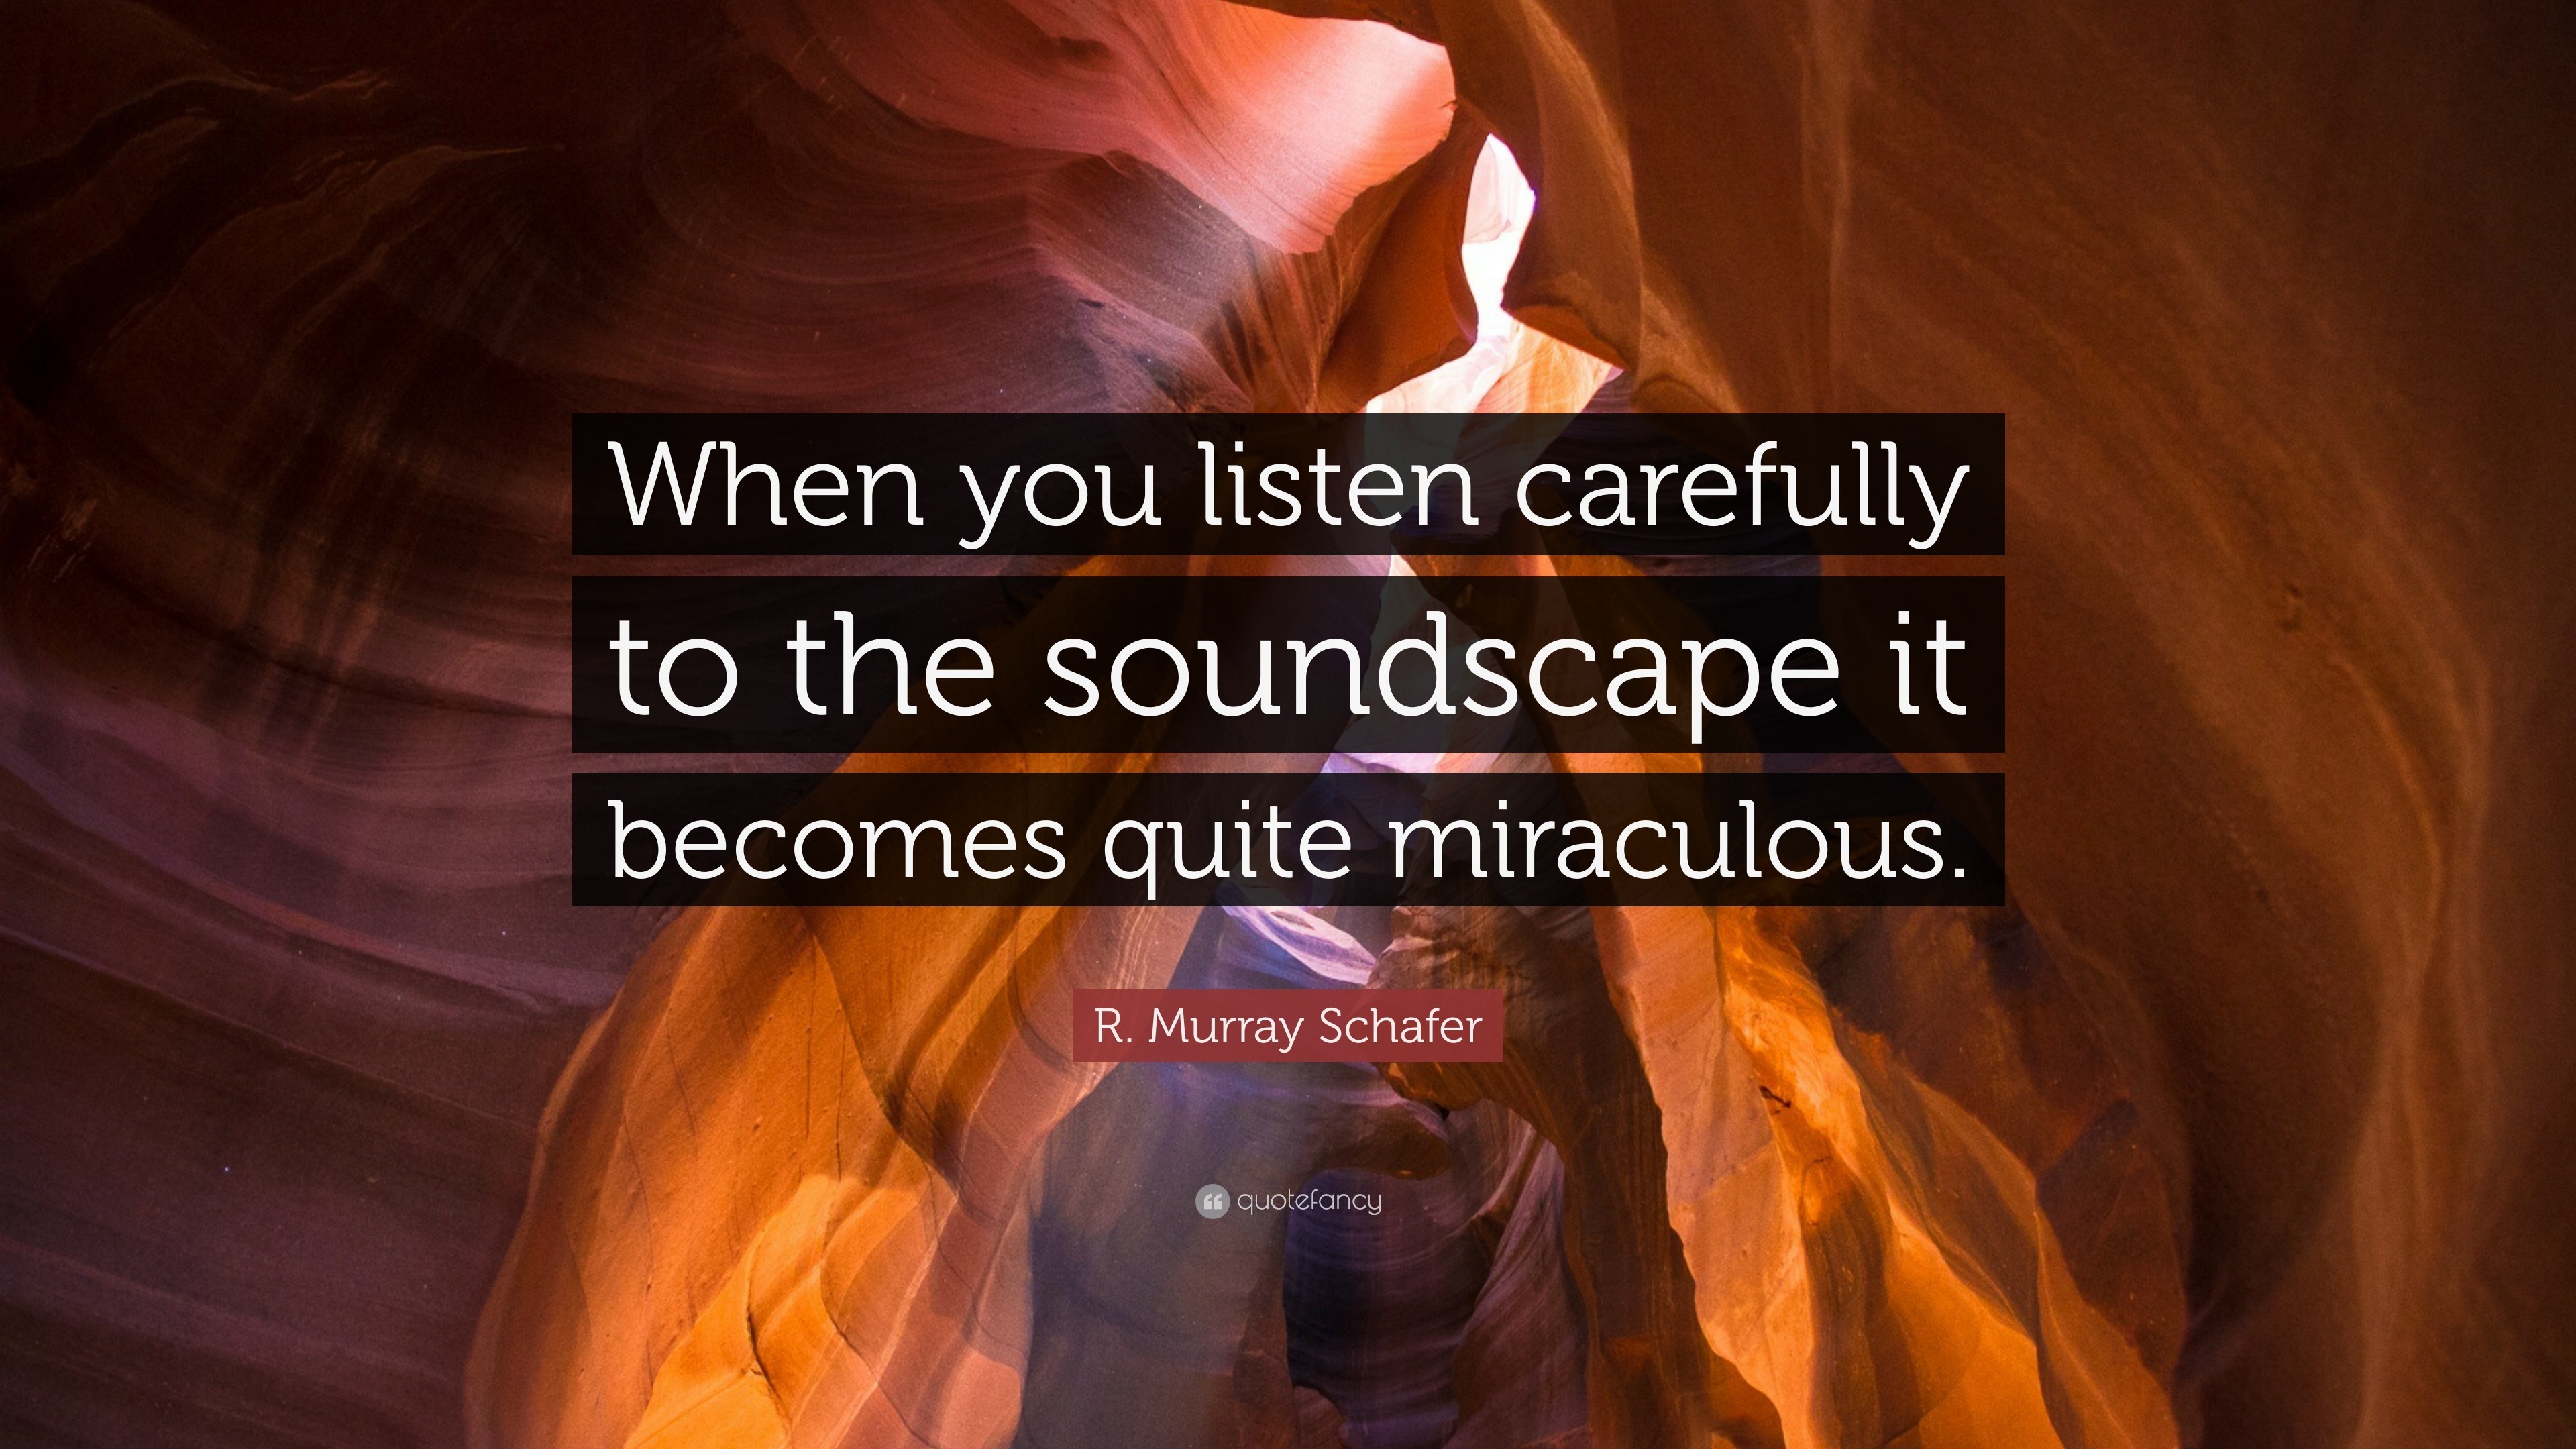 R. Murray Schafer Quote: “When you listen carefully to the soundscape ...